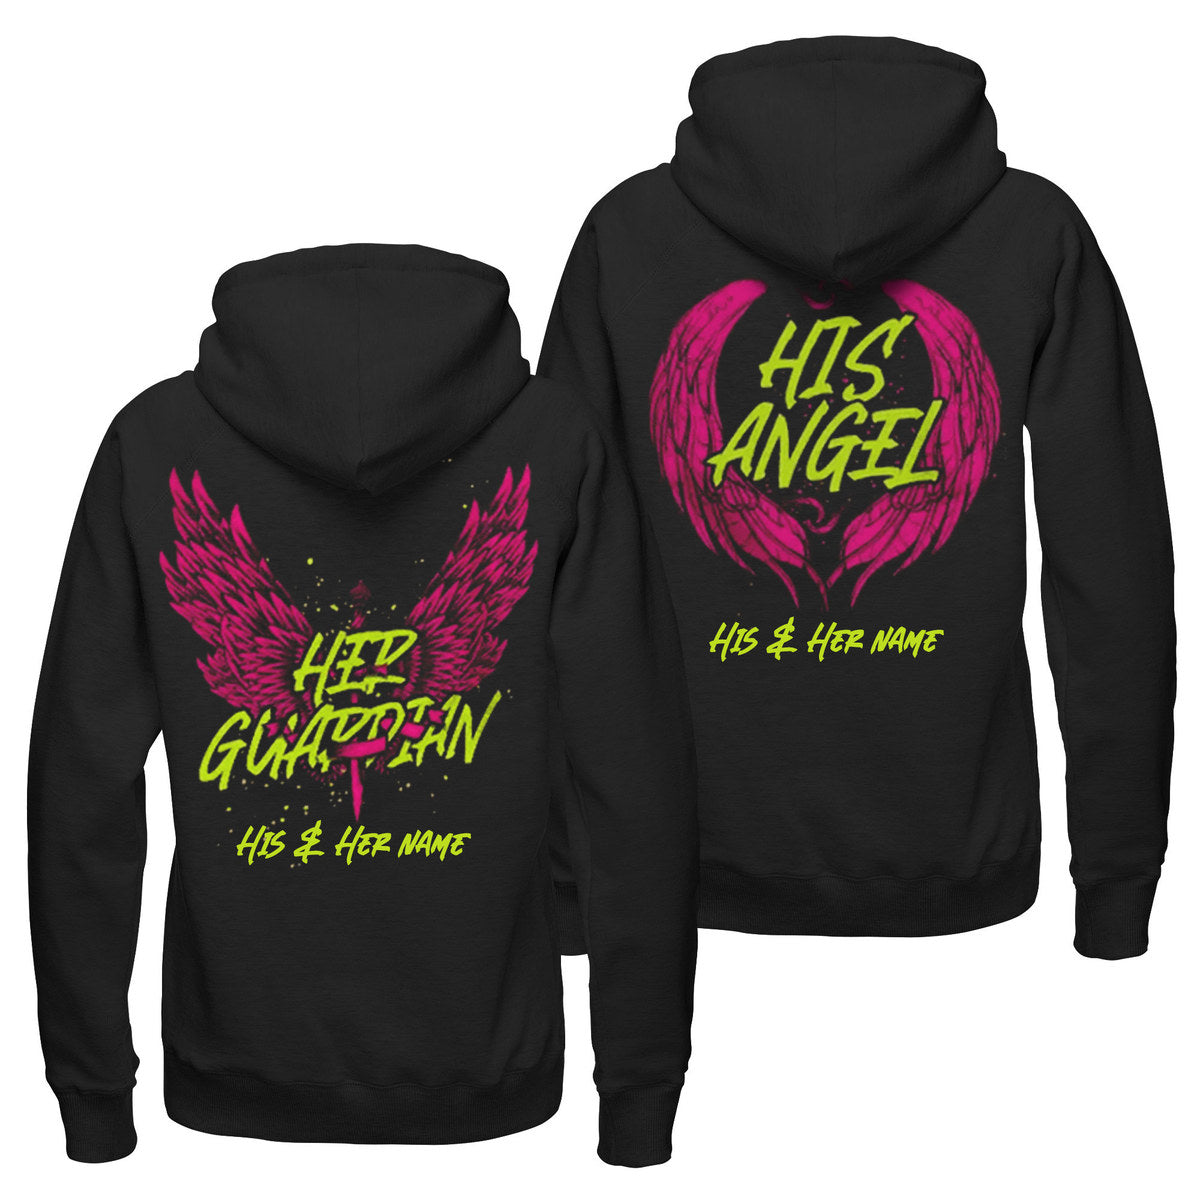 Personalized Her Guardian His Angle Hoodie, Pink Wing Hoodie, Valentine’S Day Hoodie, Couple Matching Couple Hoodie, Unisex Hoodie